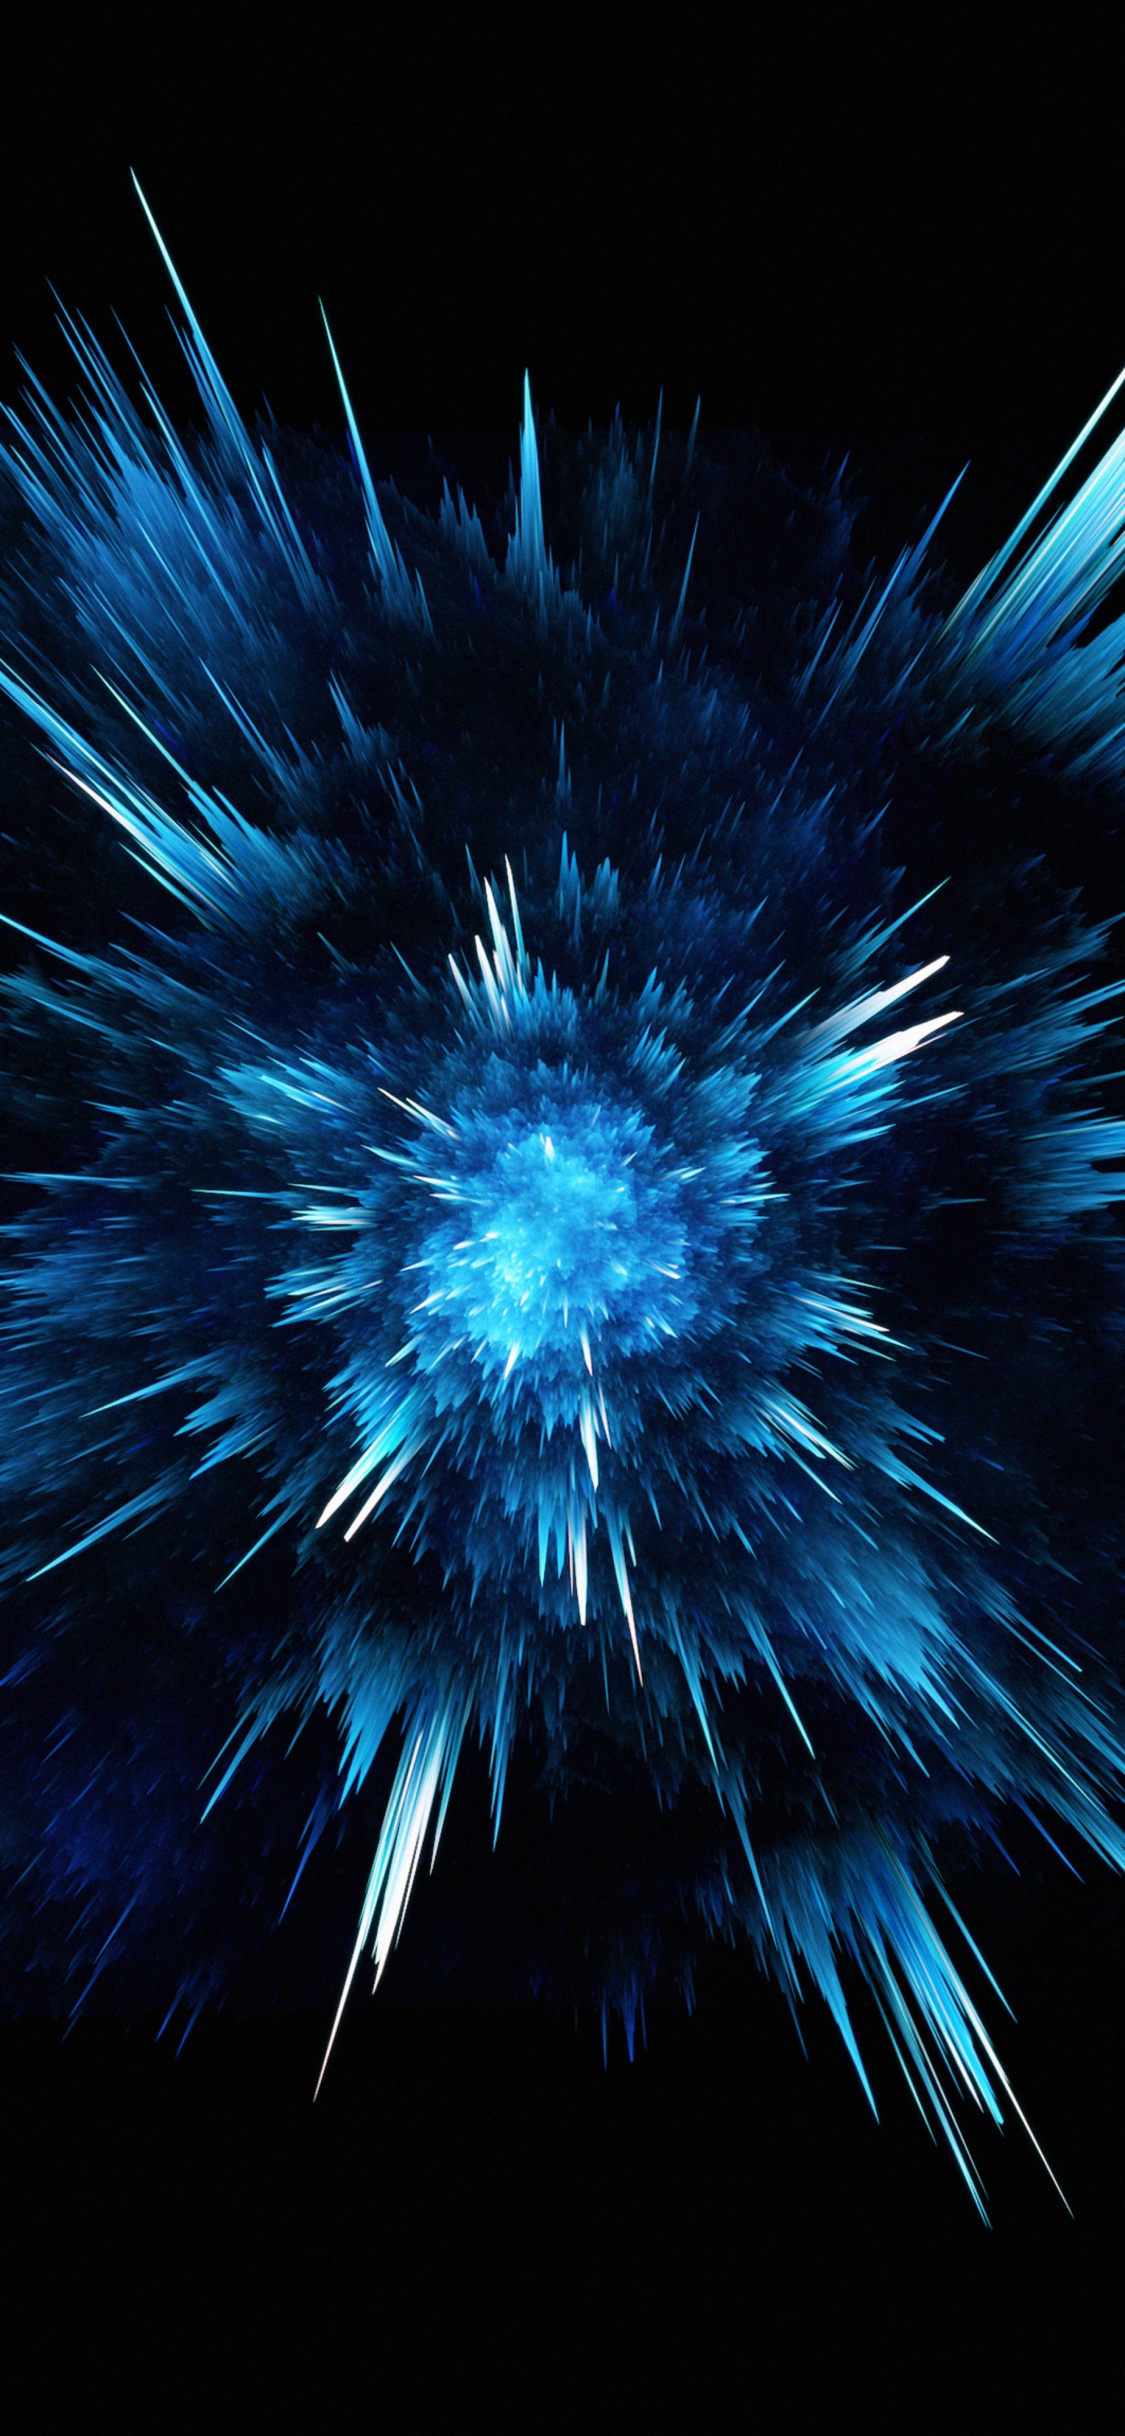 Blue and White Light on Black Background. Wallpaper in 1125x2436 Resolution